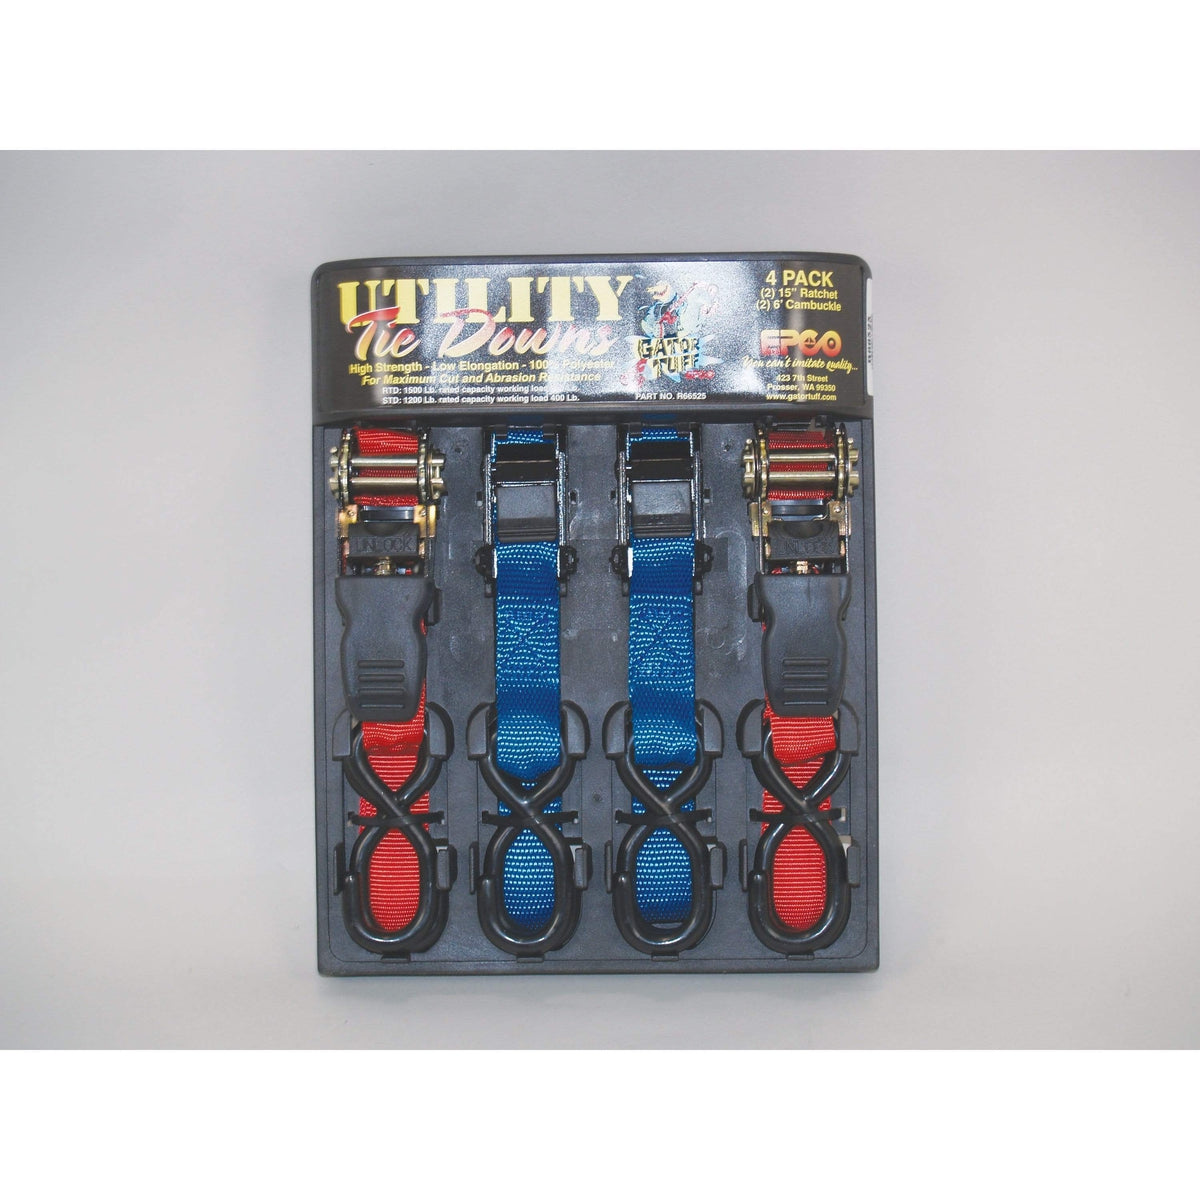 Epco Gator Tuff Tie-Down Ratchet and Cambuckle Strap Set #R66525